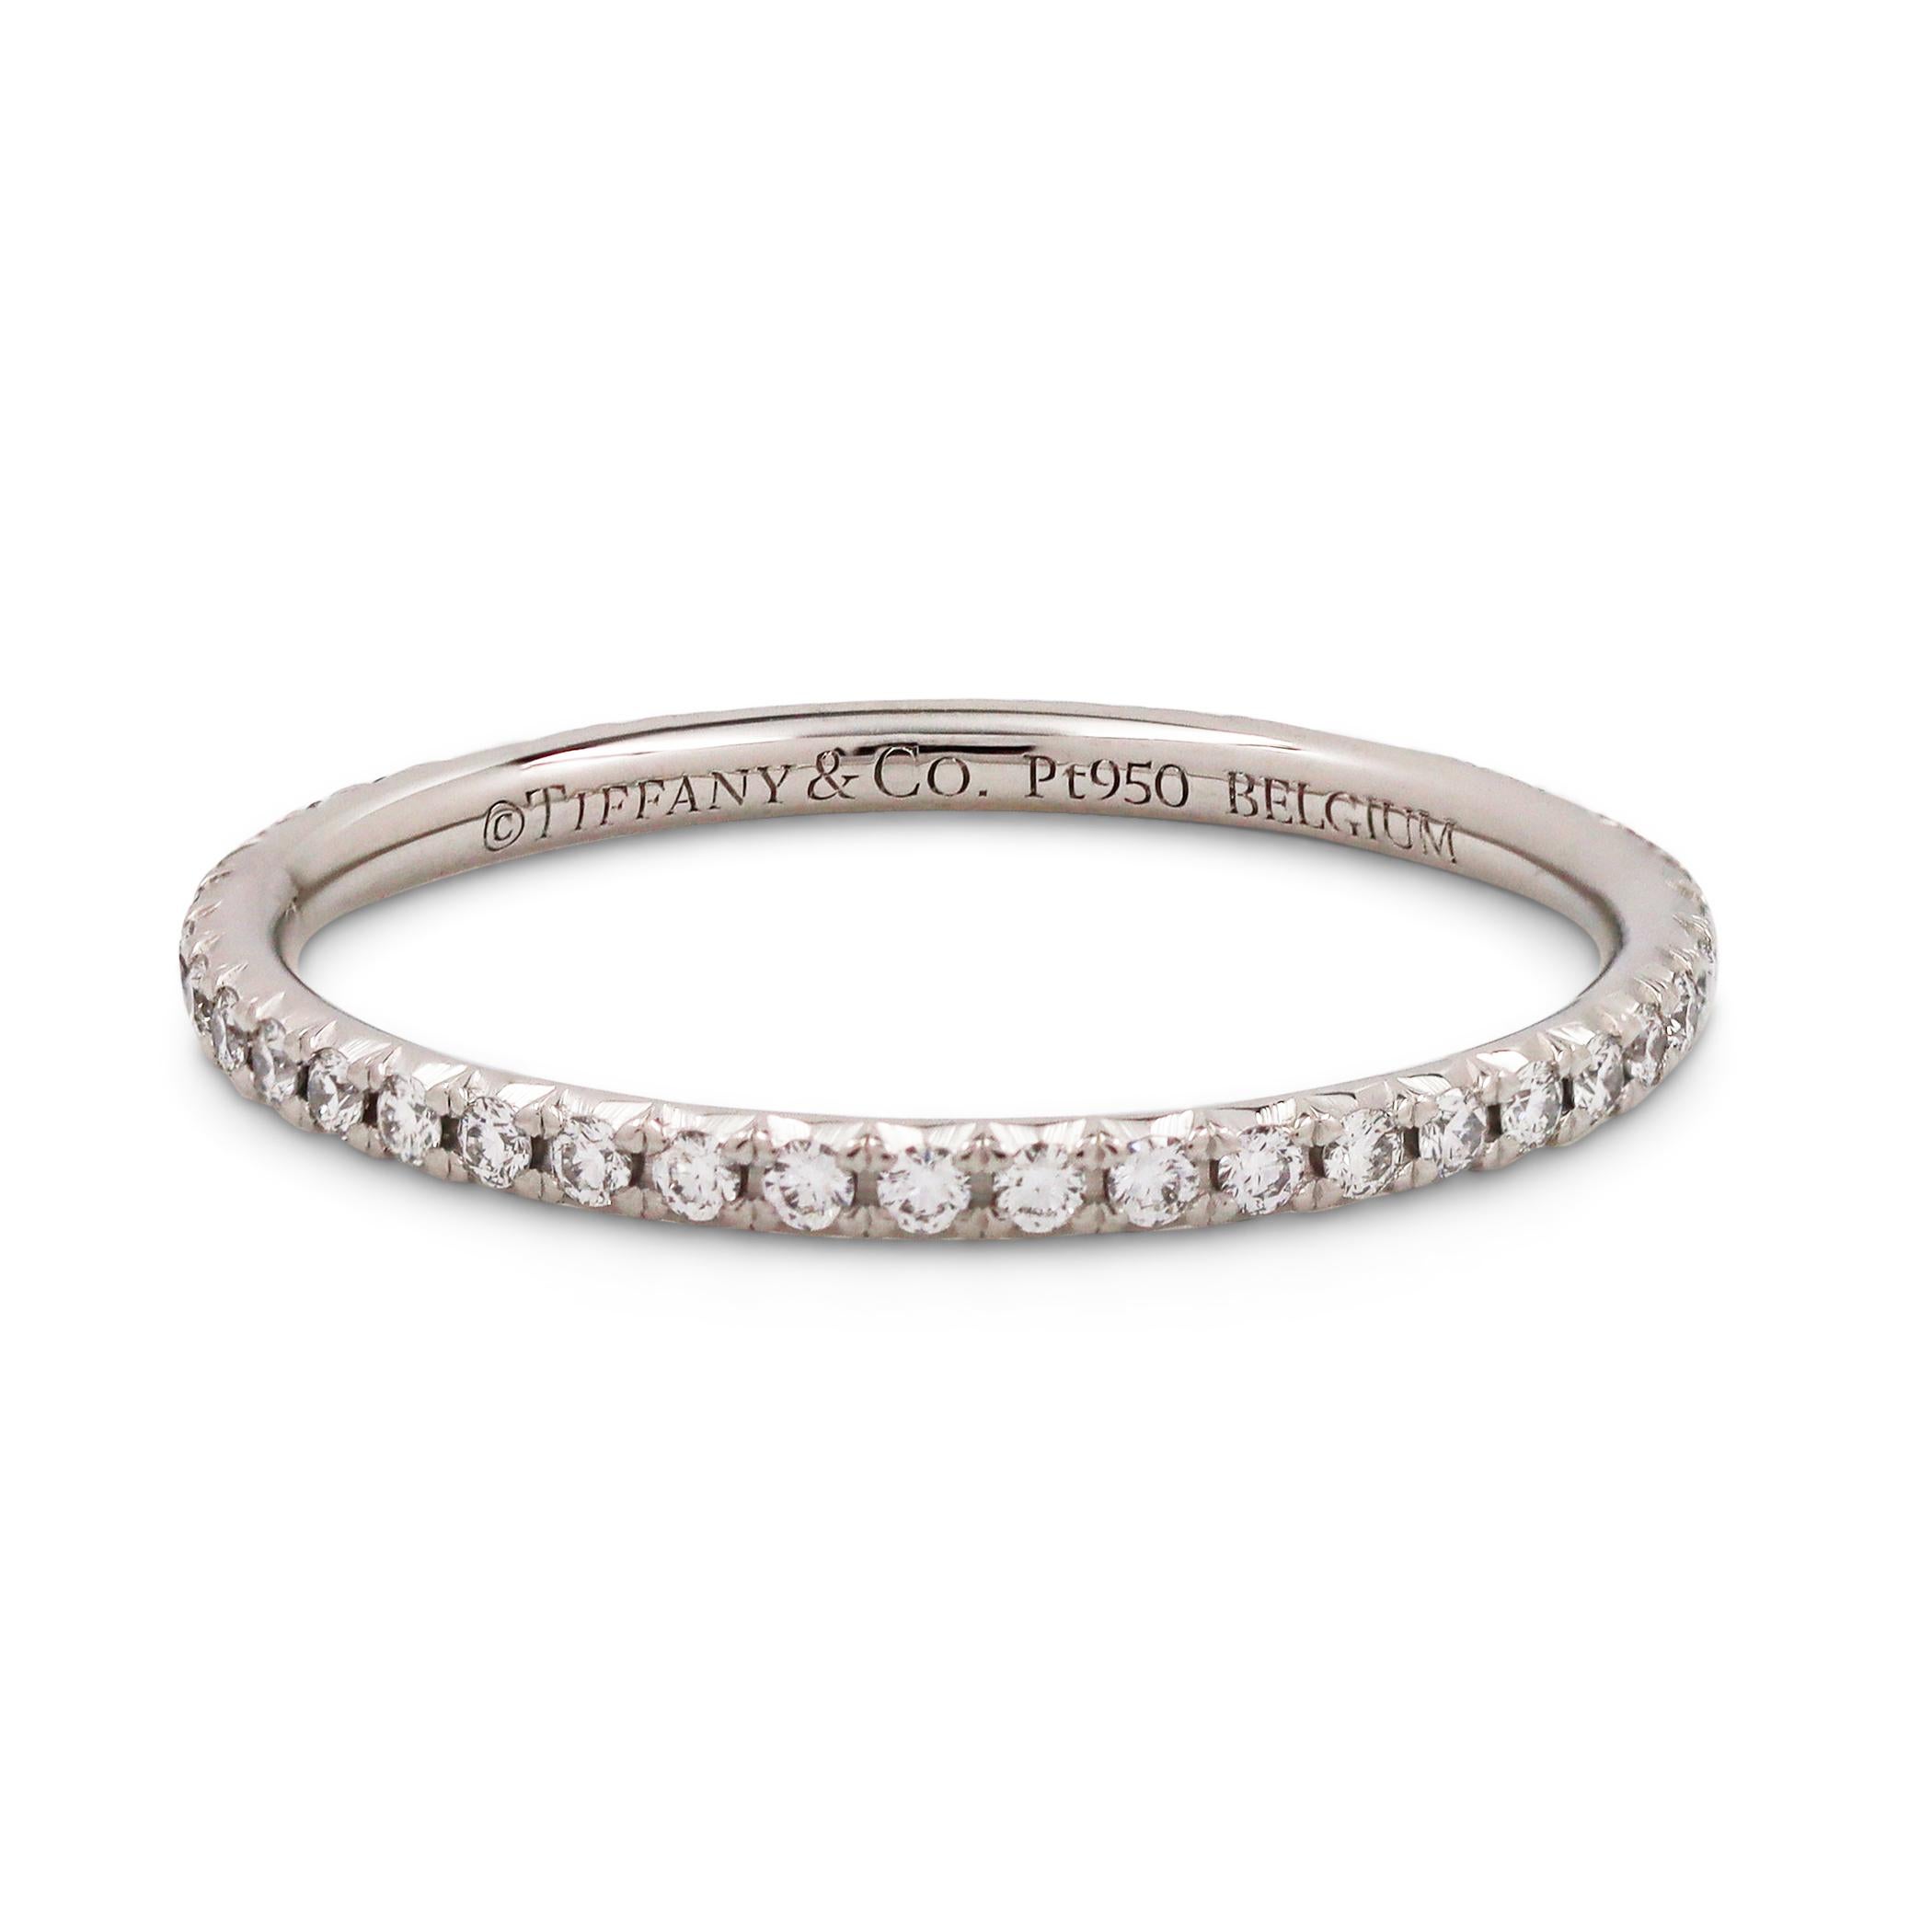 Authentic Tiffany & Co. 'Soleste' eternity band crafted in platinum and set with approximately 0.42 carats of glittering round brilliant cut diamonds. US Size 6. Signed Tiffany & Co., PT950, Belgium. Ring is presented without the original box and